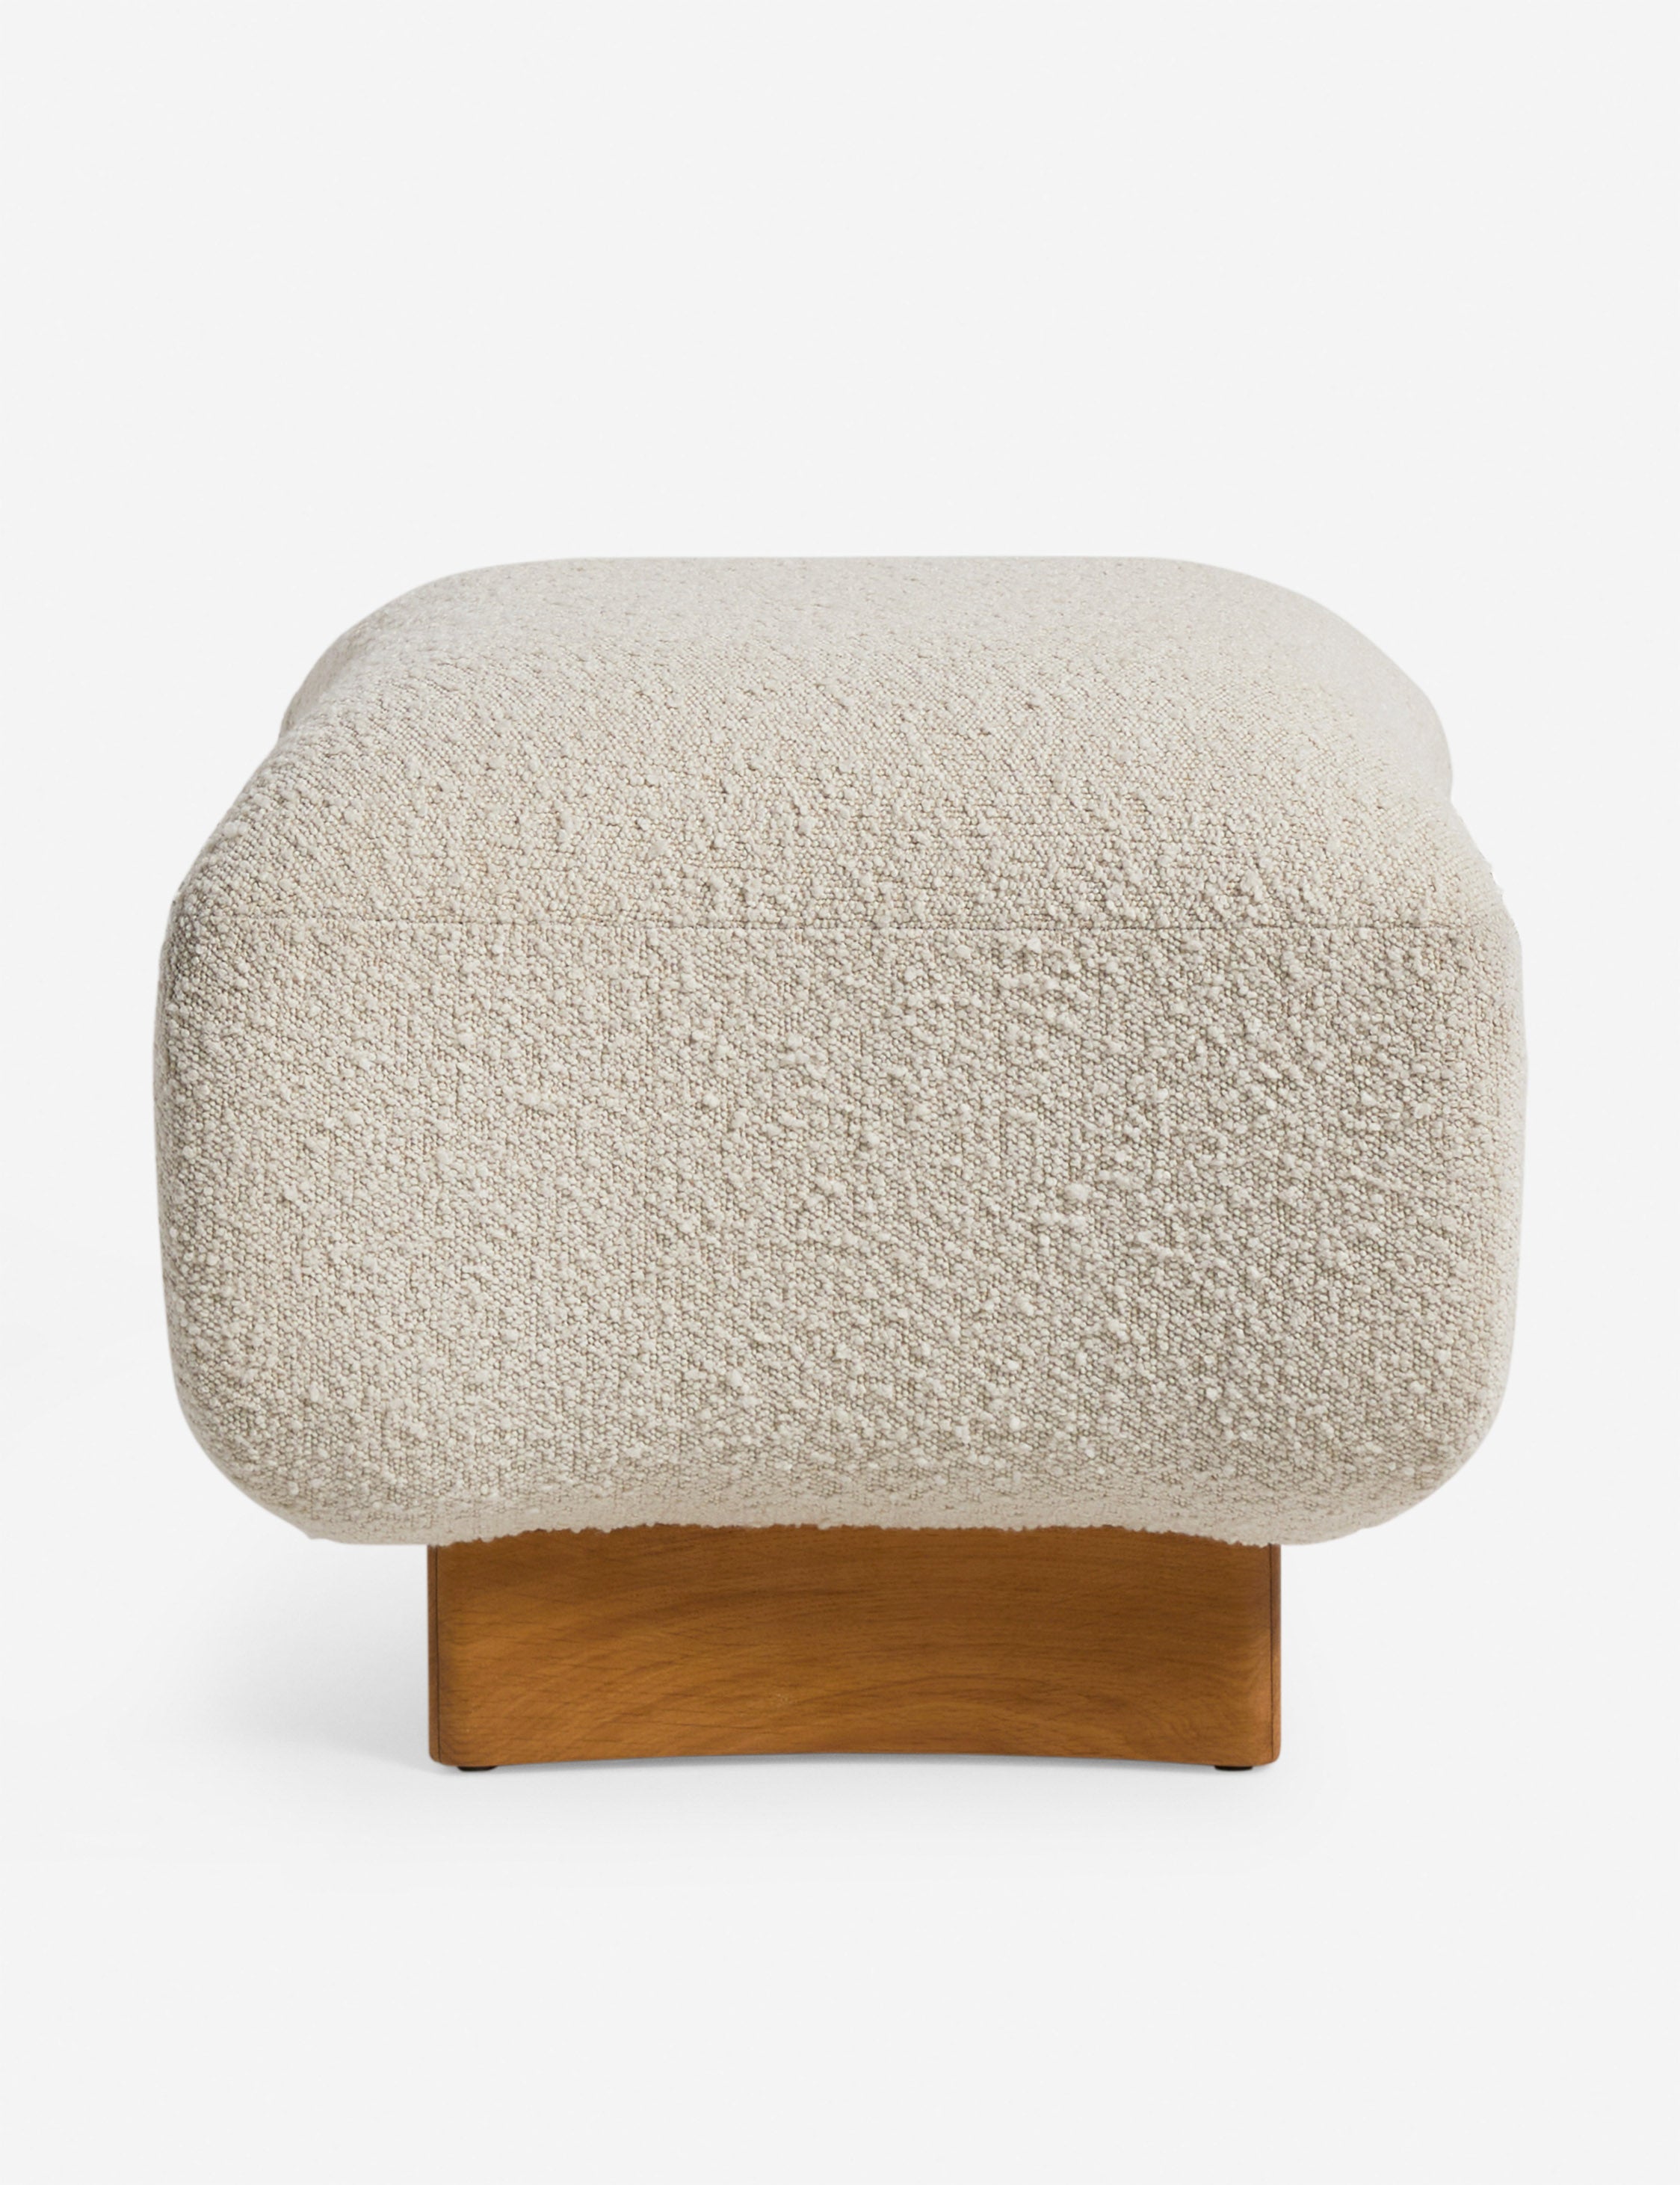 Lua Ottoman by Eny Lee Parker